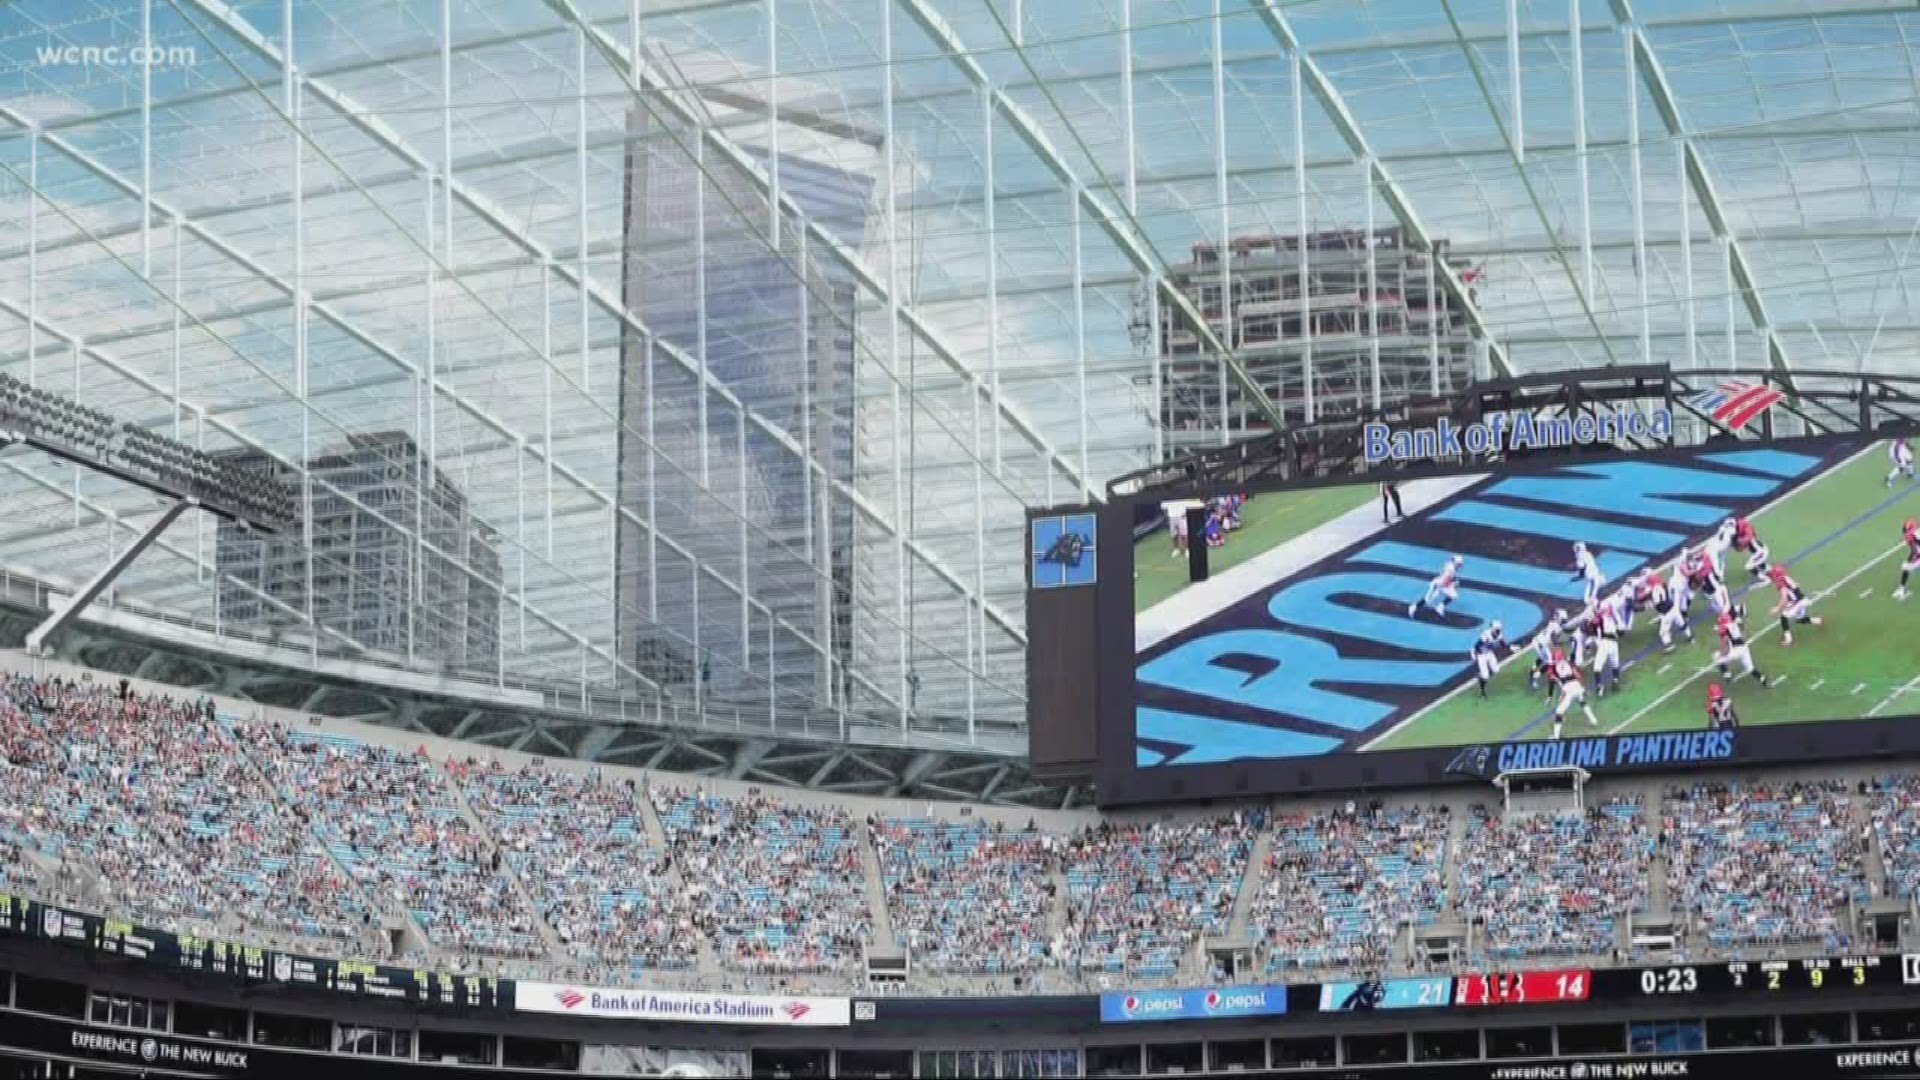 Team owner David Tepper has mentioned many times that he wants a new stadium for the Carolina Panthers.